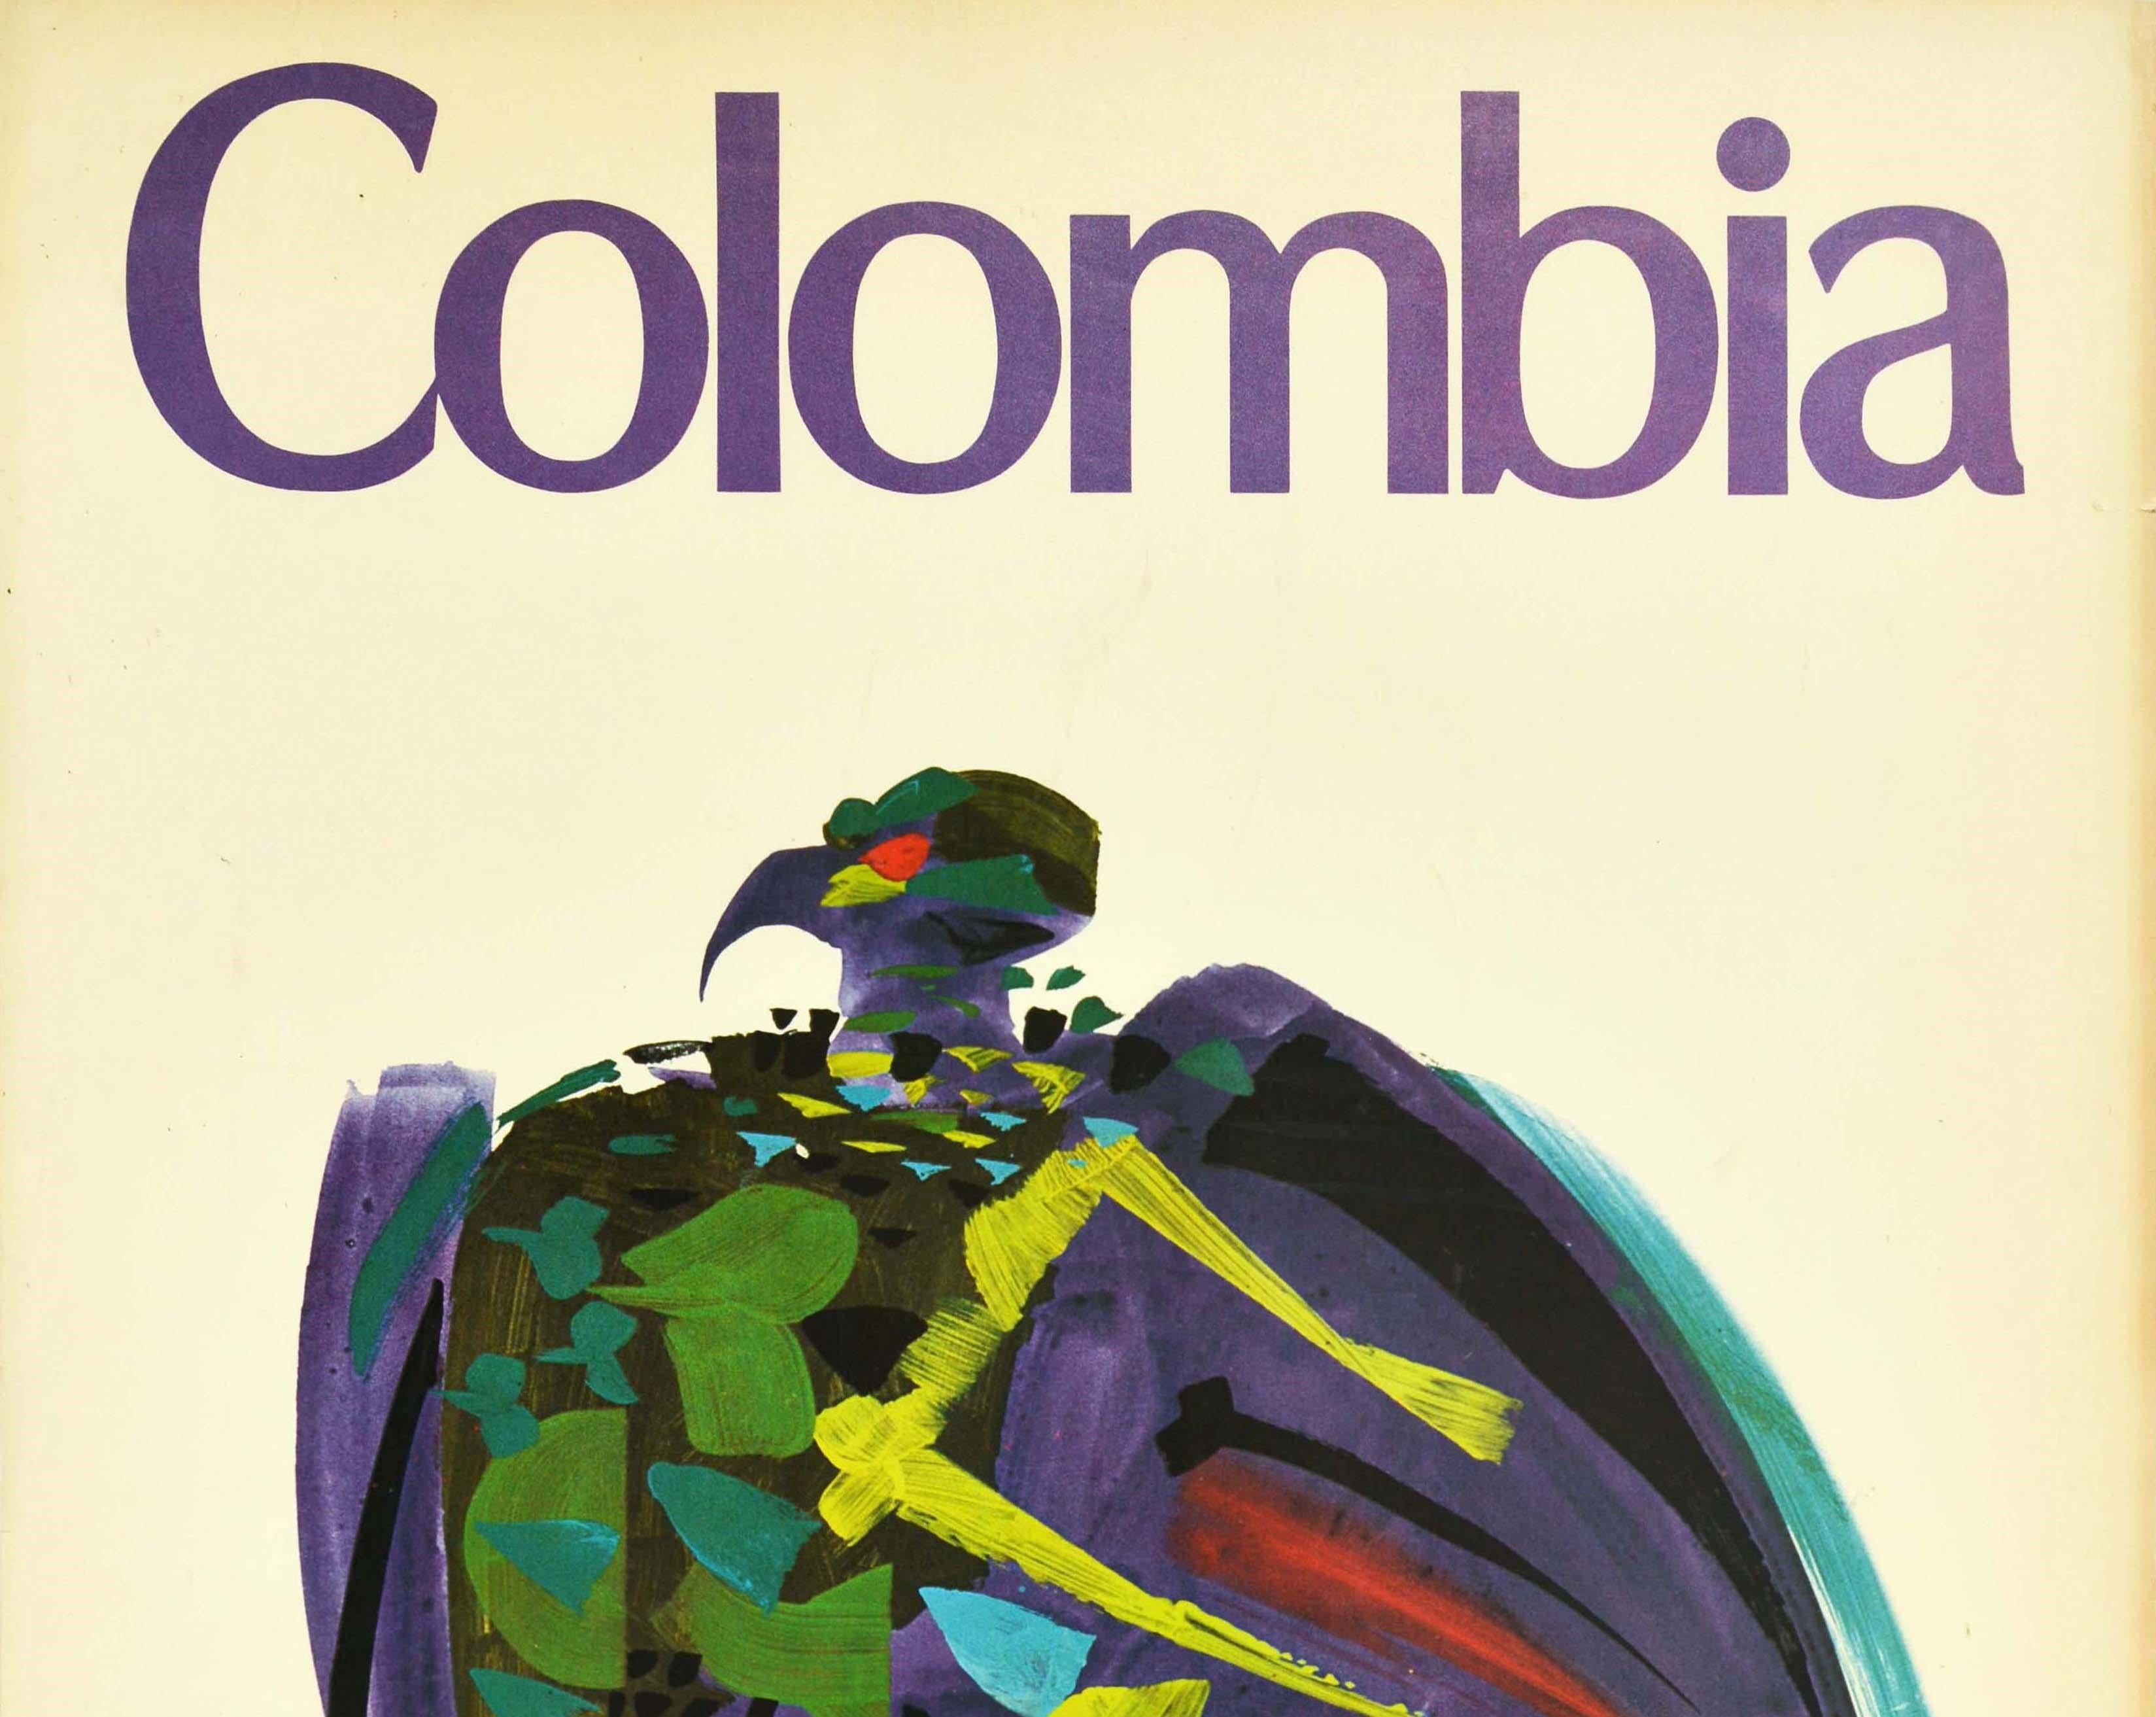 Original vintage travel poster for Colombia in South America featuring a colourful design of an Andean Condor (the country's national bird as a symbol of power and health associated with the sun god) on a rock with the bold title above, the